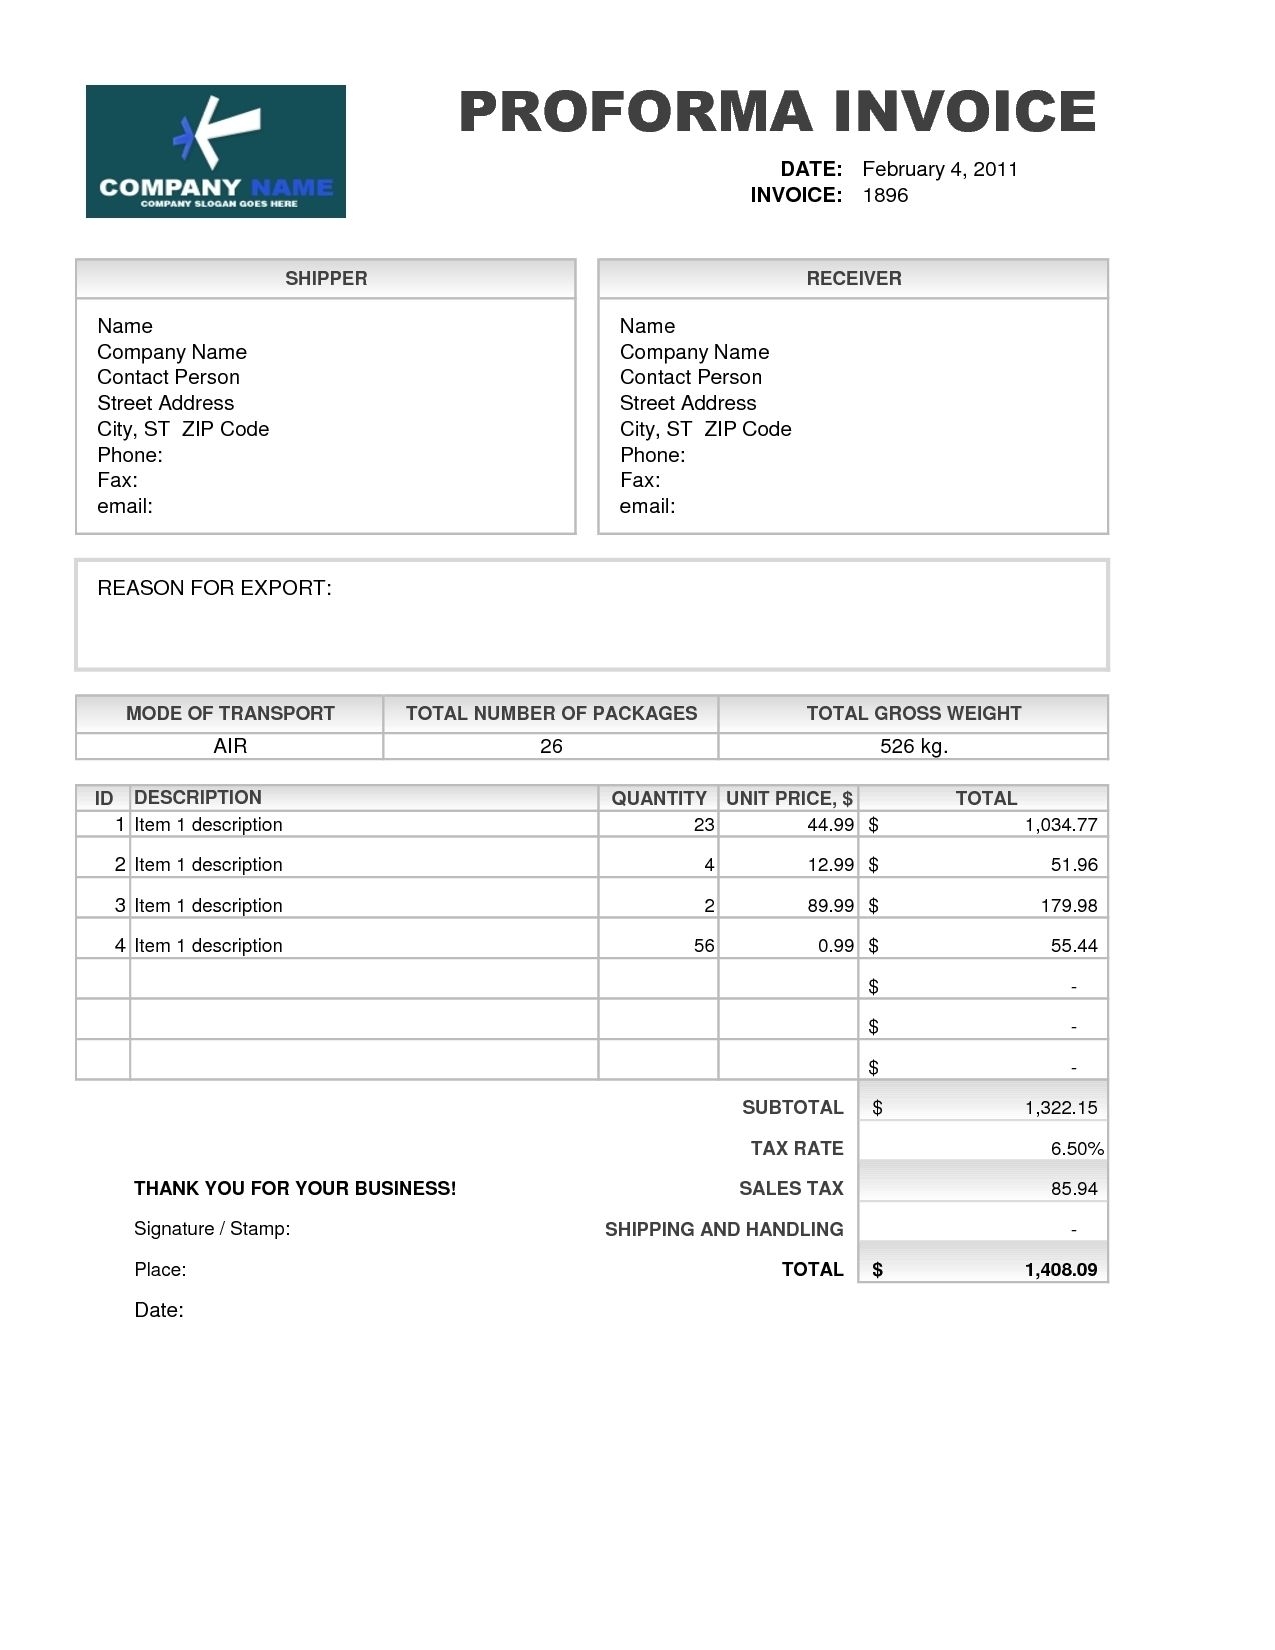 samples of proforma invoice invoice template free 2016 what's the meaning of invoice